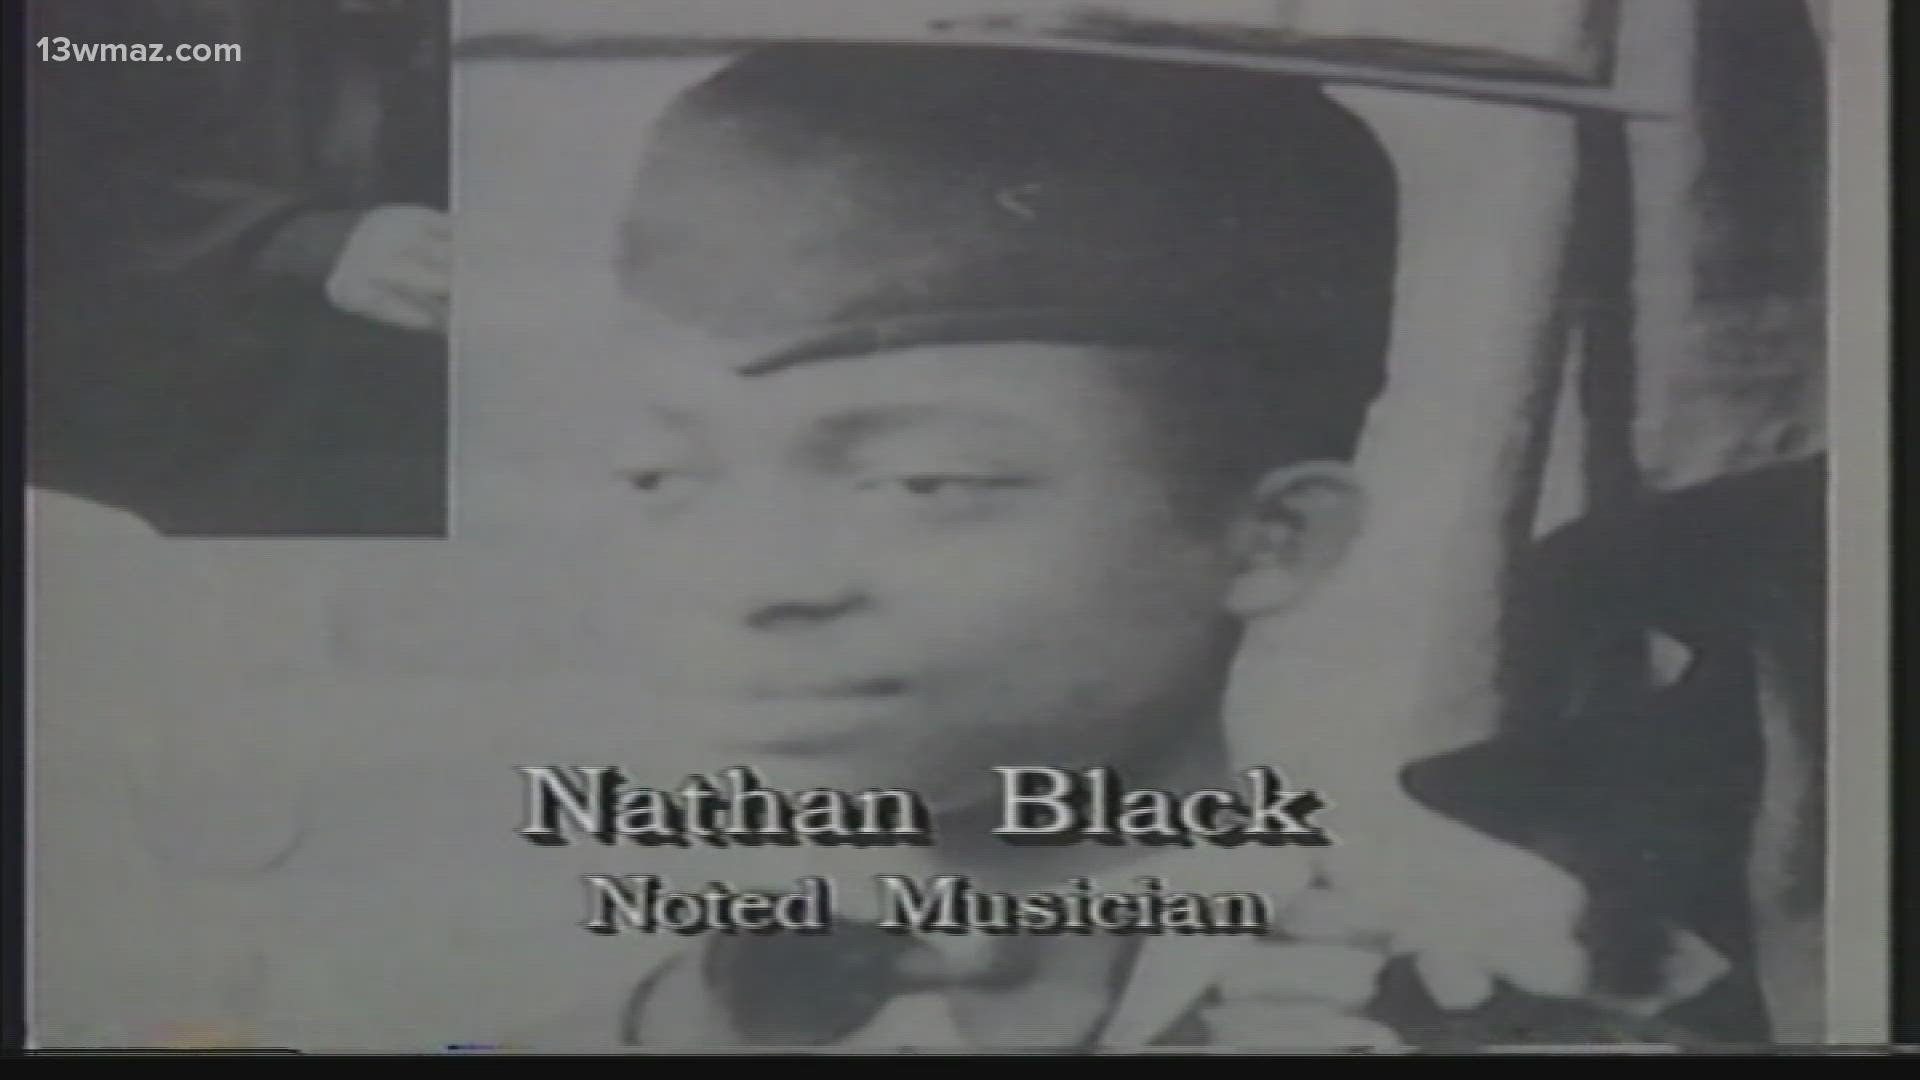 Professor Nathan Black was known as a great piano player and violinist who taught countless students around Macon.